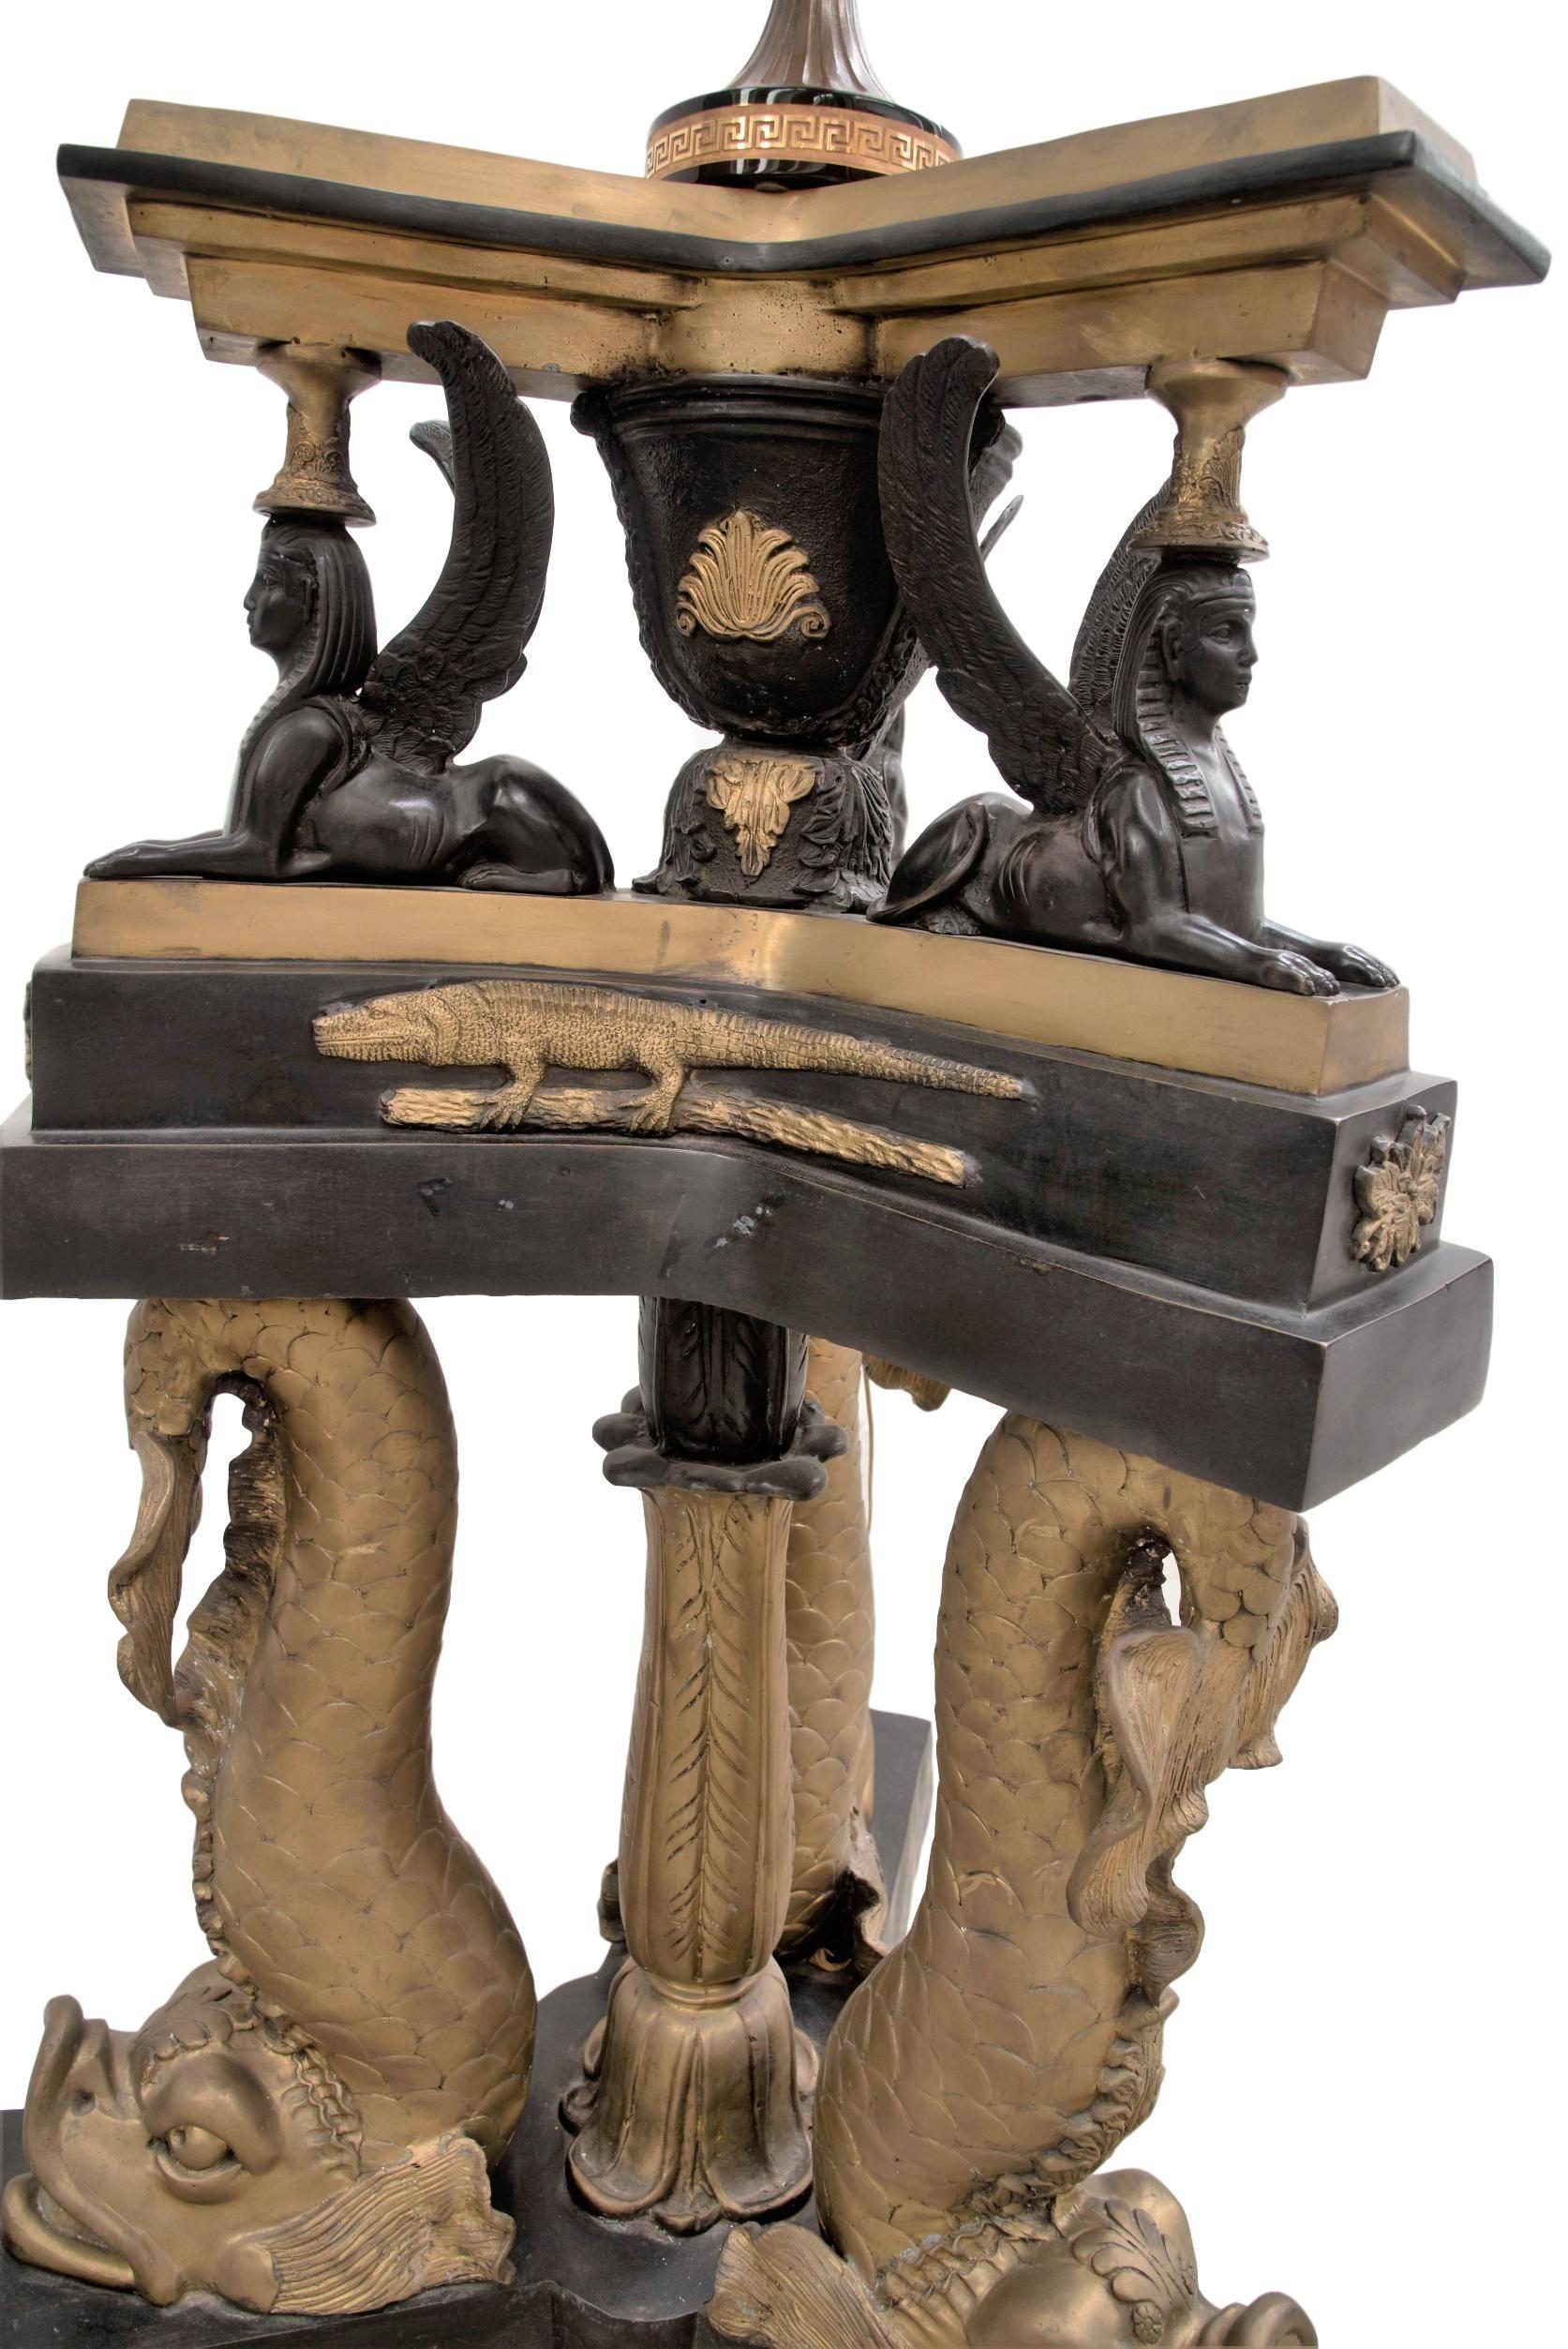 Extraordinary bronze lamp, based on the original lamp part of the famous Dolphin Suite.
A spectacular example of Regency flamboyance, this fish-adorned suite of furniture, was made in circa 1810. For the aptly named Mr. John Fish to homage Lord